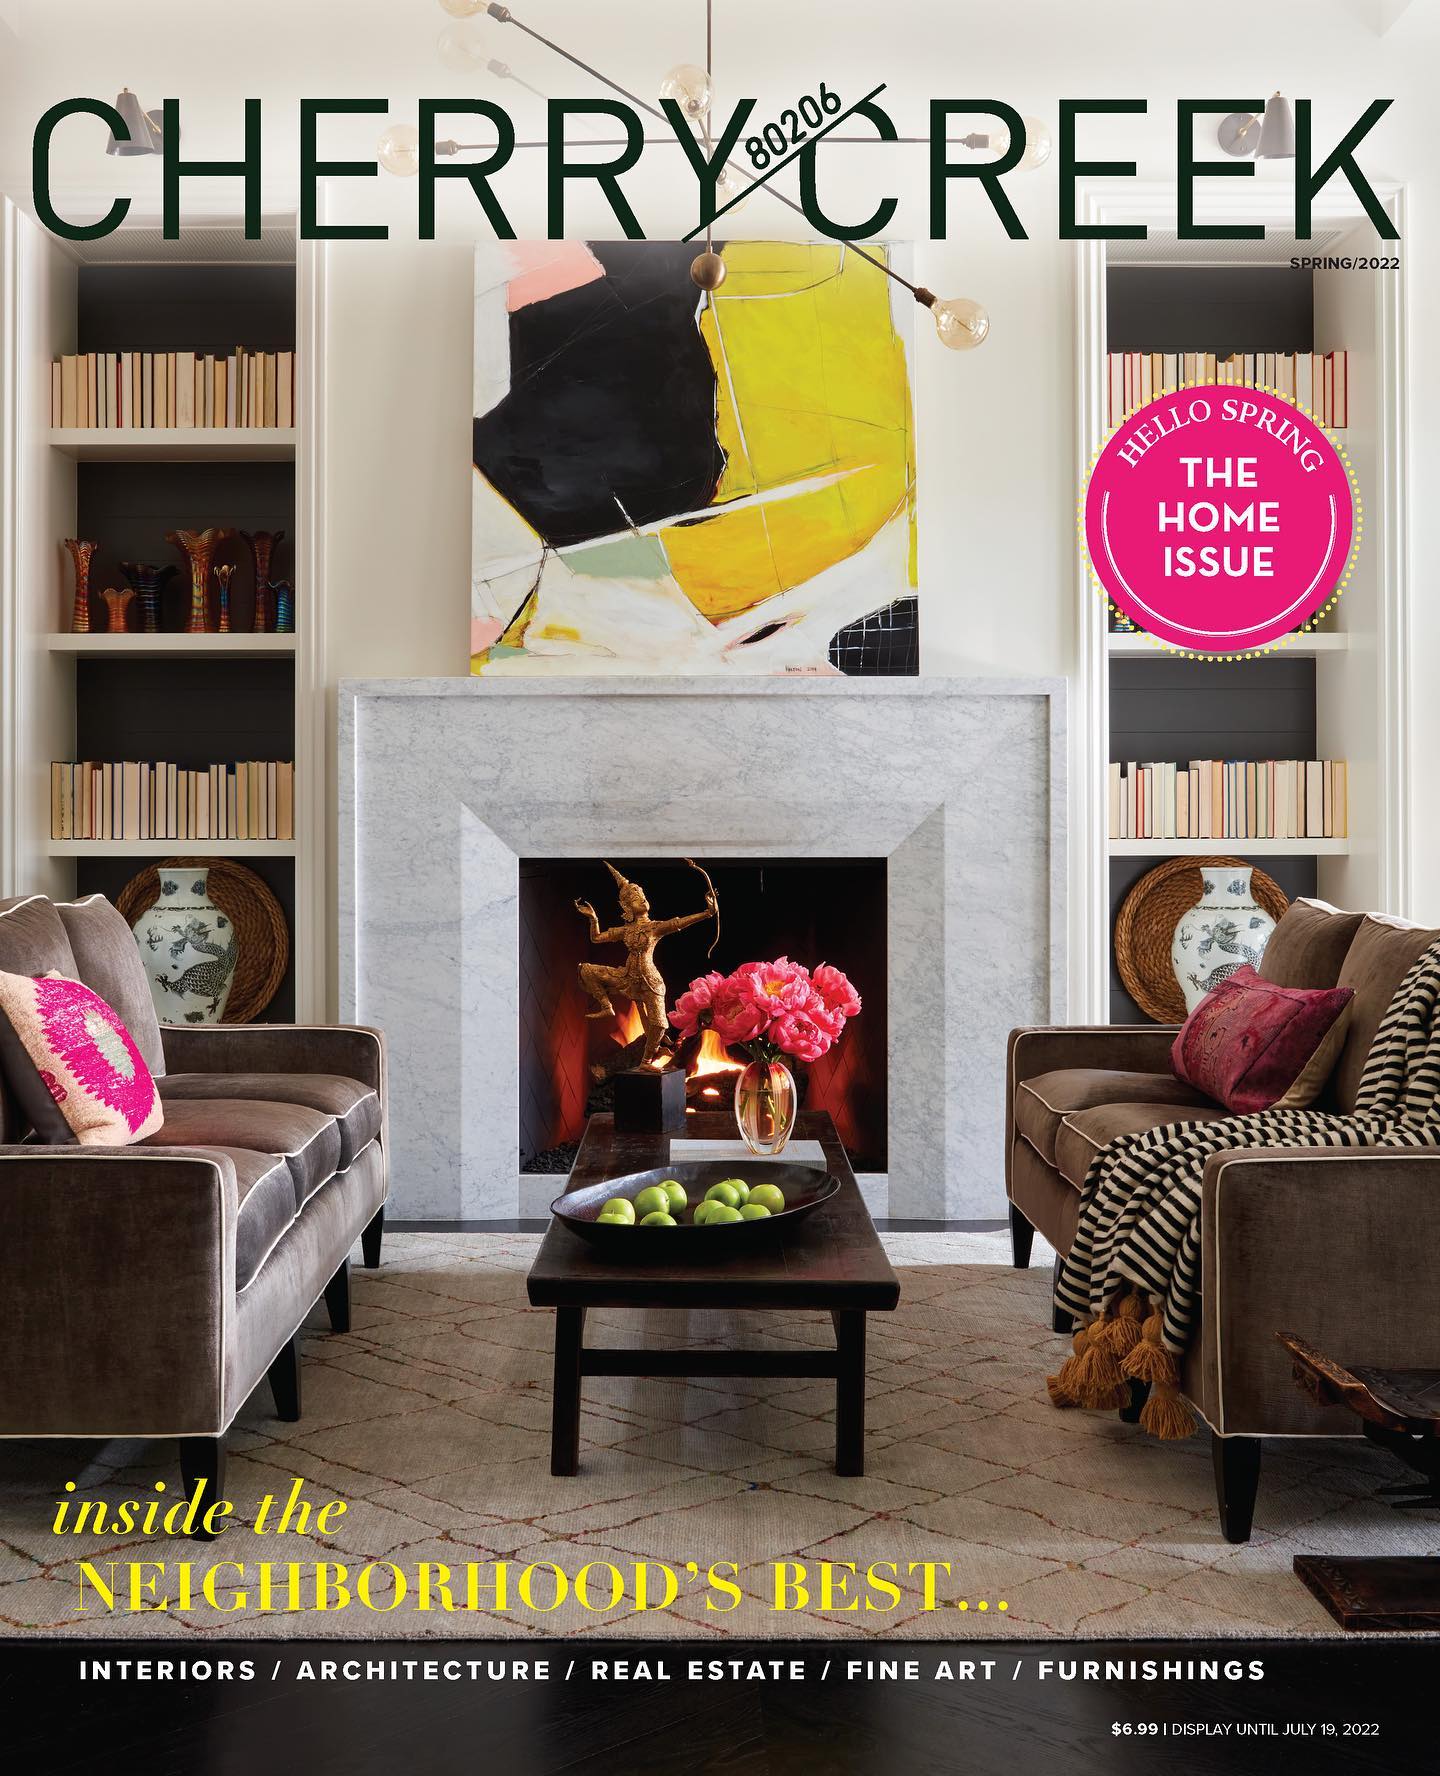 Our new issue is LIVE! In our first ever HOME ISSUE, we chat with the designers, architects, real estate pros and retailers who make Cherry Creek feel like home. Link in bio. 

Cover Image by Roger Davies, Cover Interior Design by Andrea Monath Schumacher, for Vibrant Interiors: Living Large at Home
.
.
.
.
#denverinteriordesign #denverrealestate #luxuryinteriors #cherrycreekrealestate #denverdesigners #denvermagazine #cherrycreeknorth #luxurydenver #cherrycreekhomes